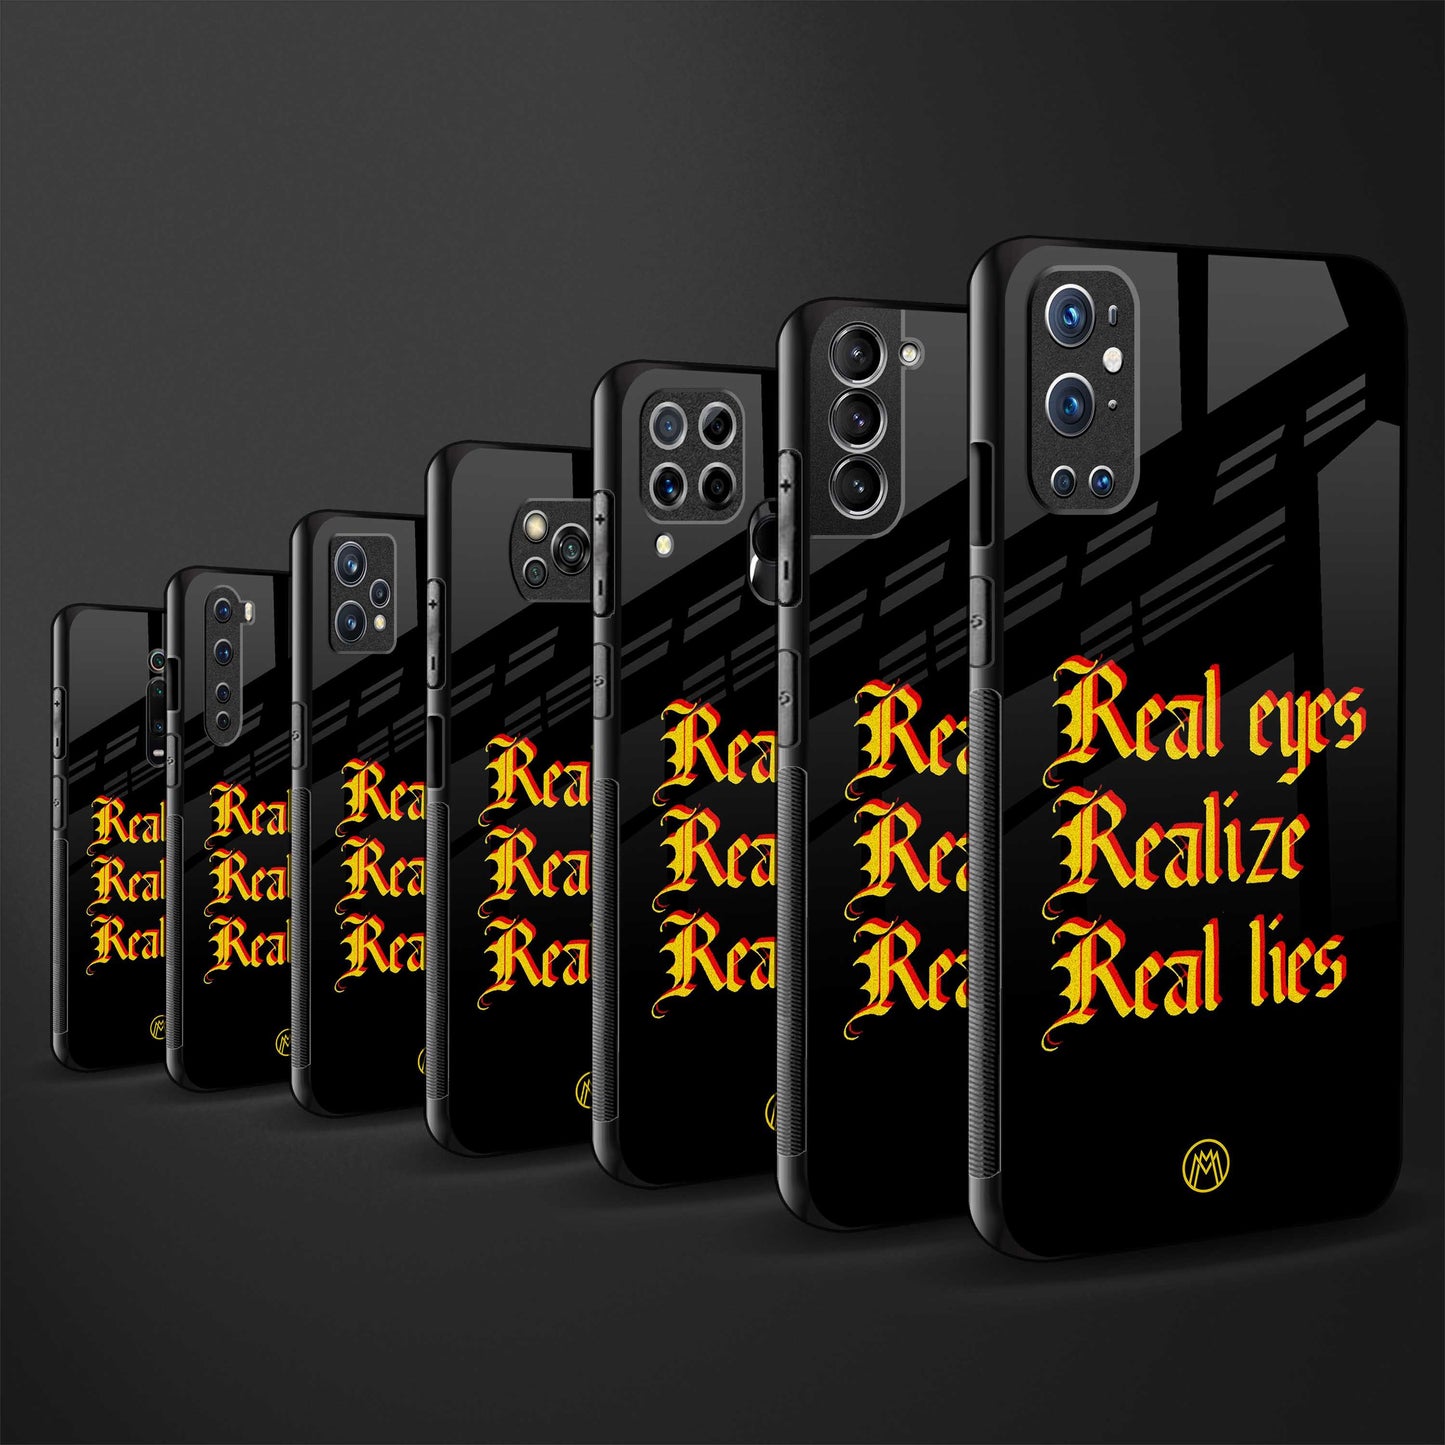 real eyes realize real lies quote glass case for oneplus 7 pro image-3